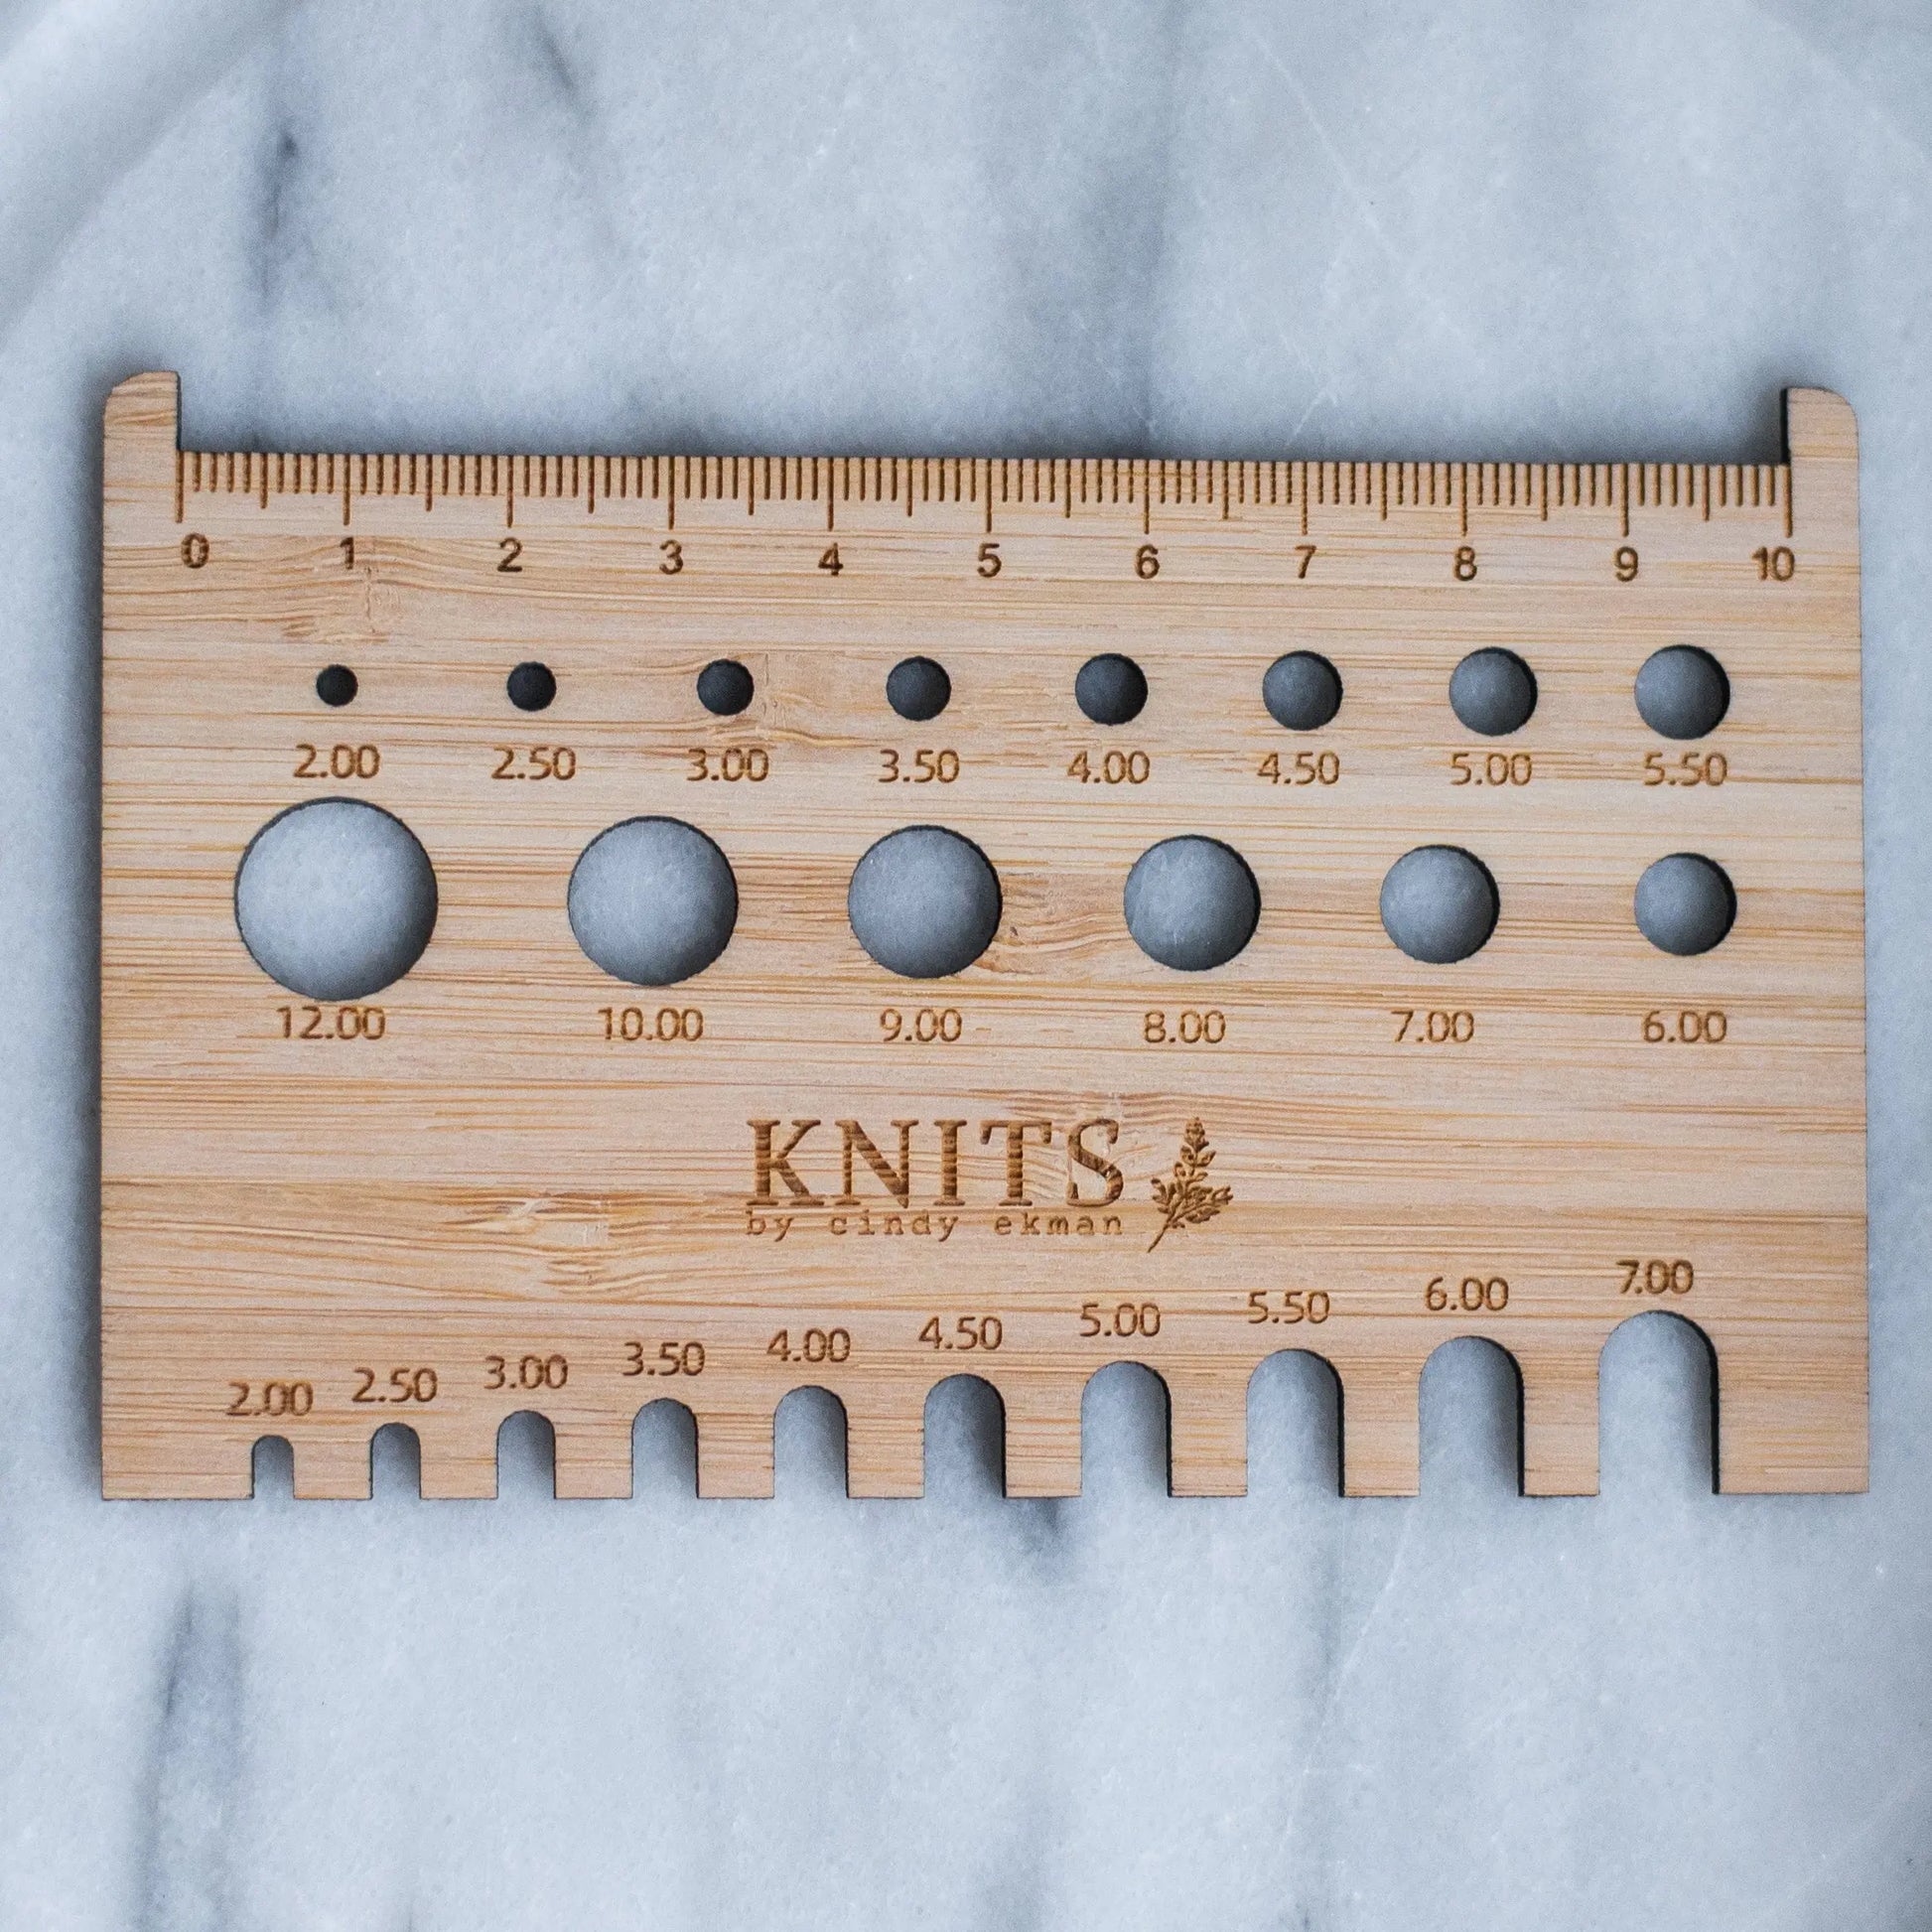 The KNITS measure tool KNITS by cindy ekman